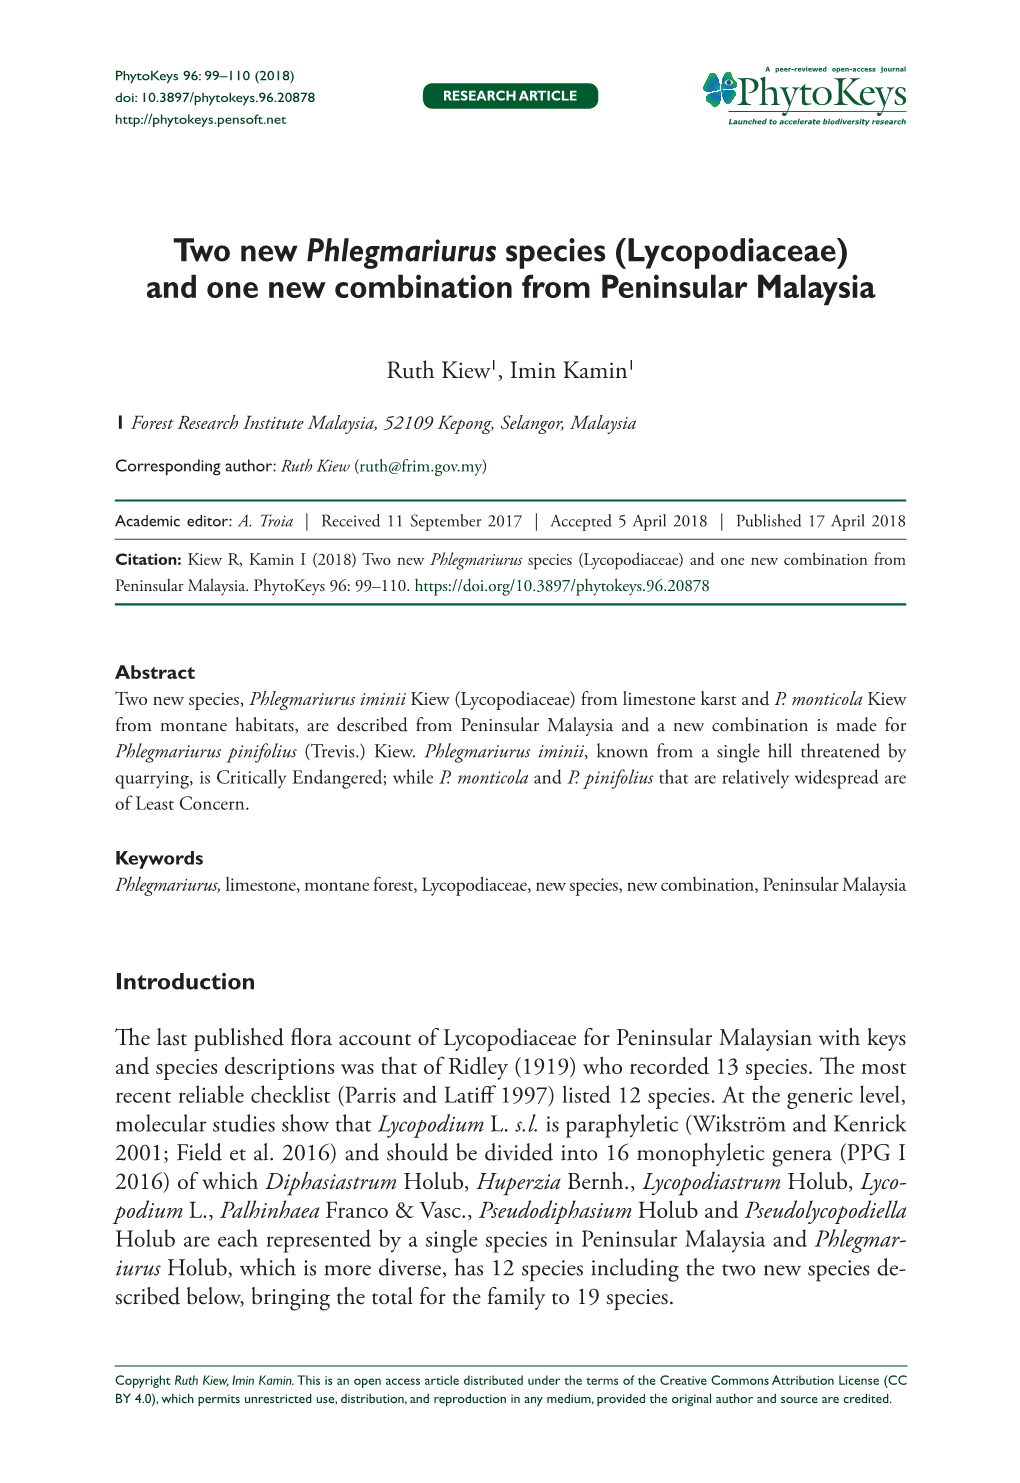 Two New Phlegmariurus Species (Lycopodiaceae) and One New Combination from Peninsular Malaysia